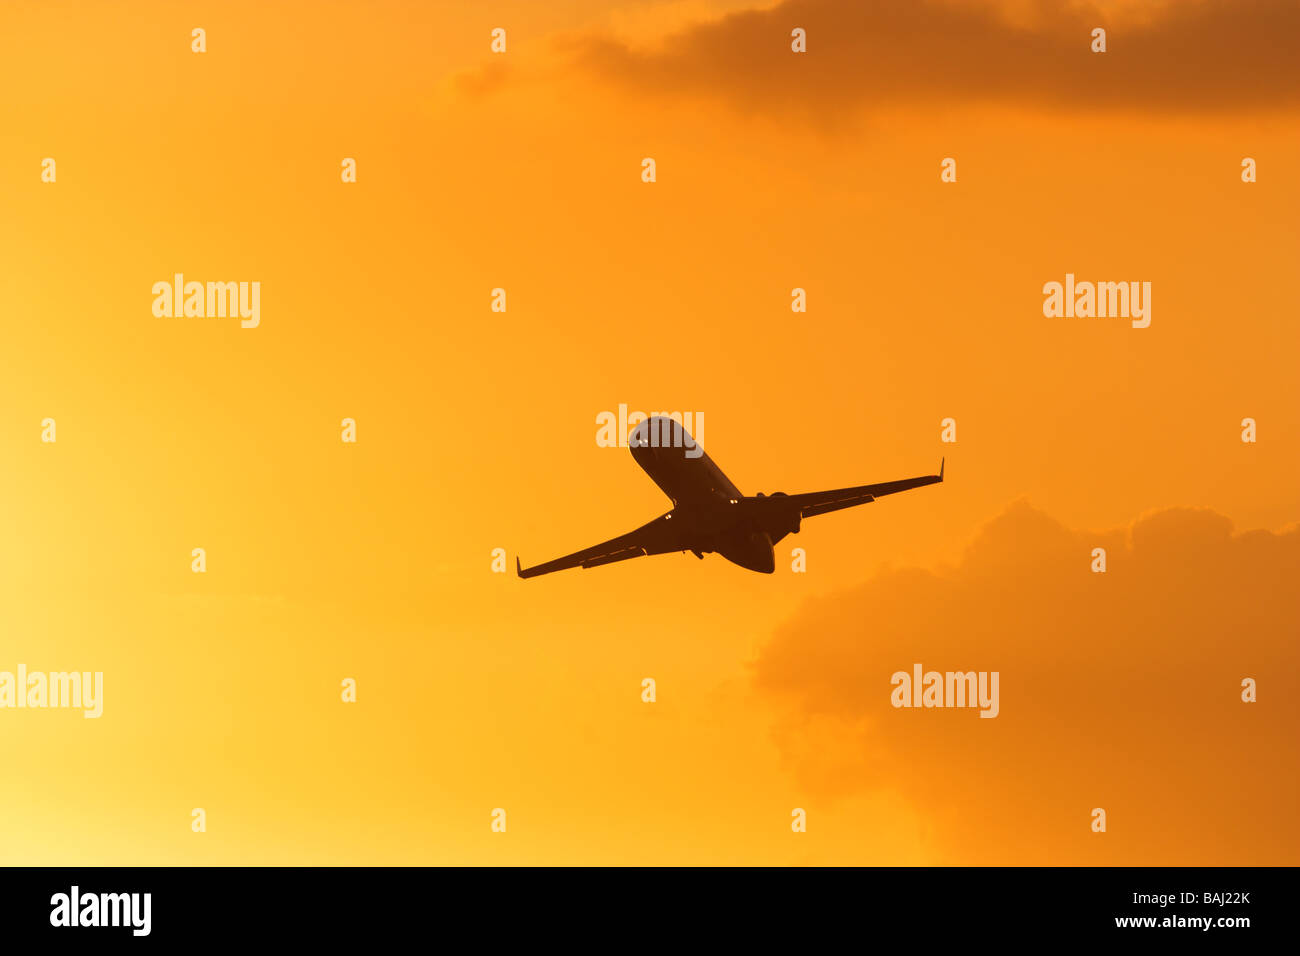 Commercial Aviation, Aircraft in flight. Stock Photo